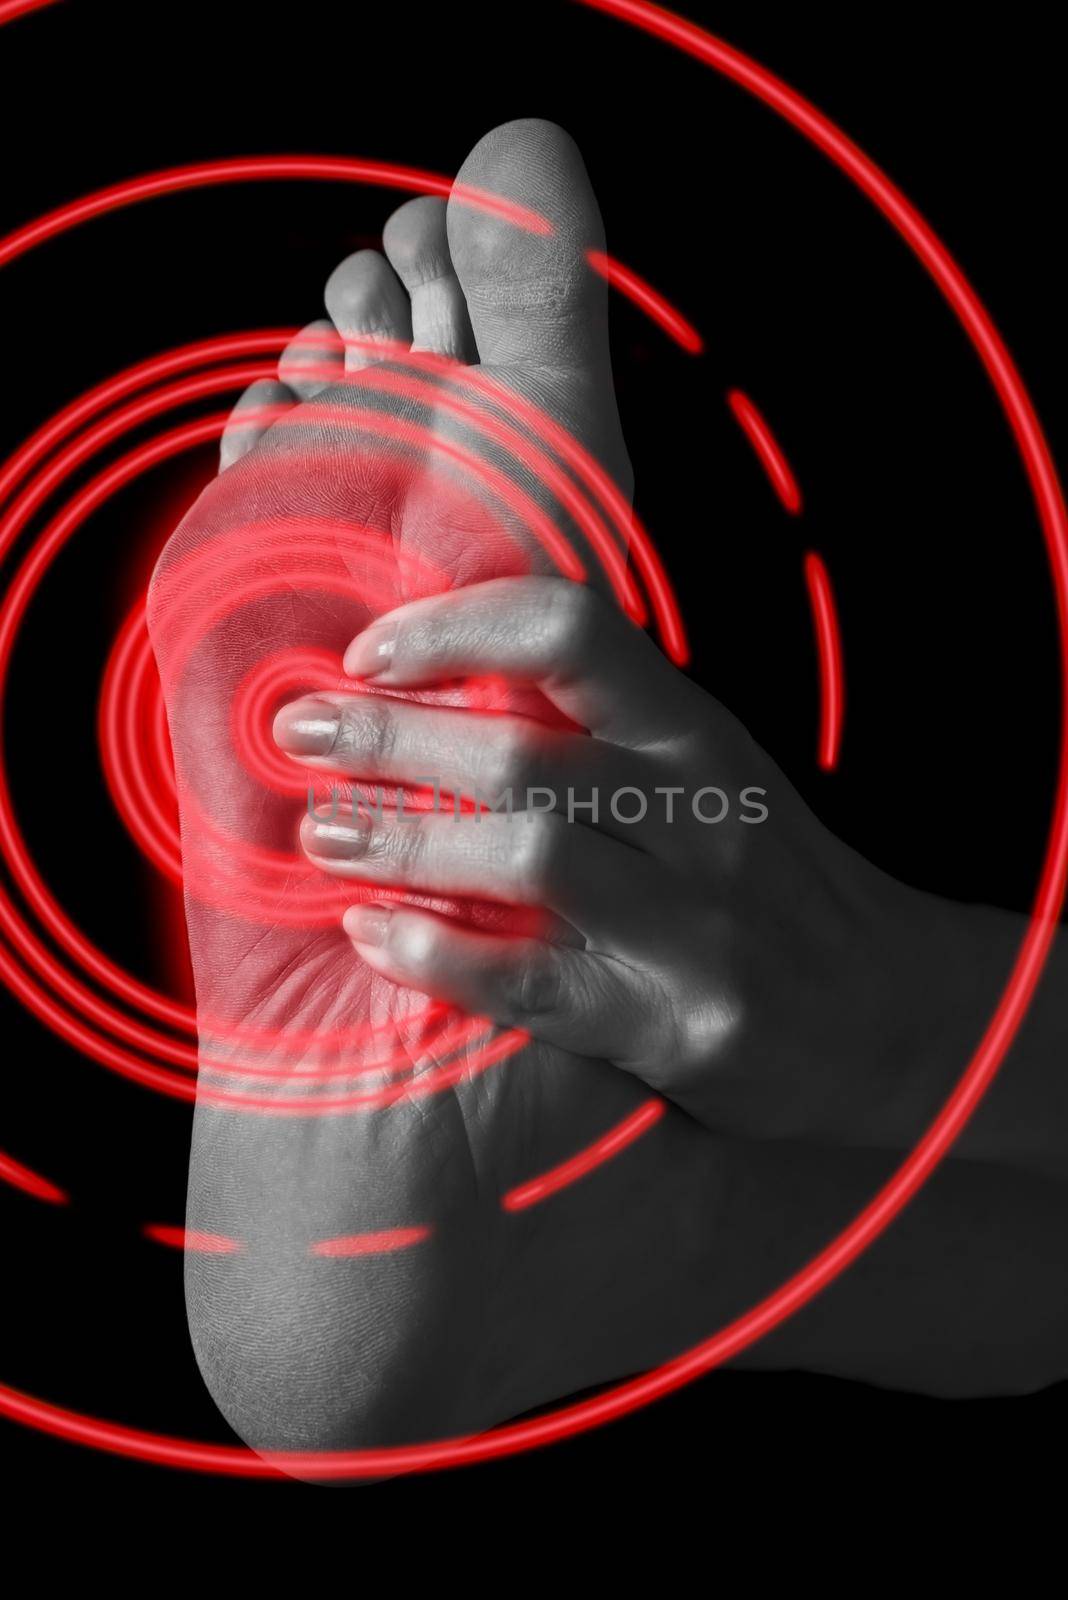 Pain in the female foot, monochrome image, pain area of red color